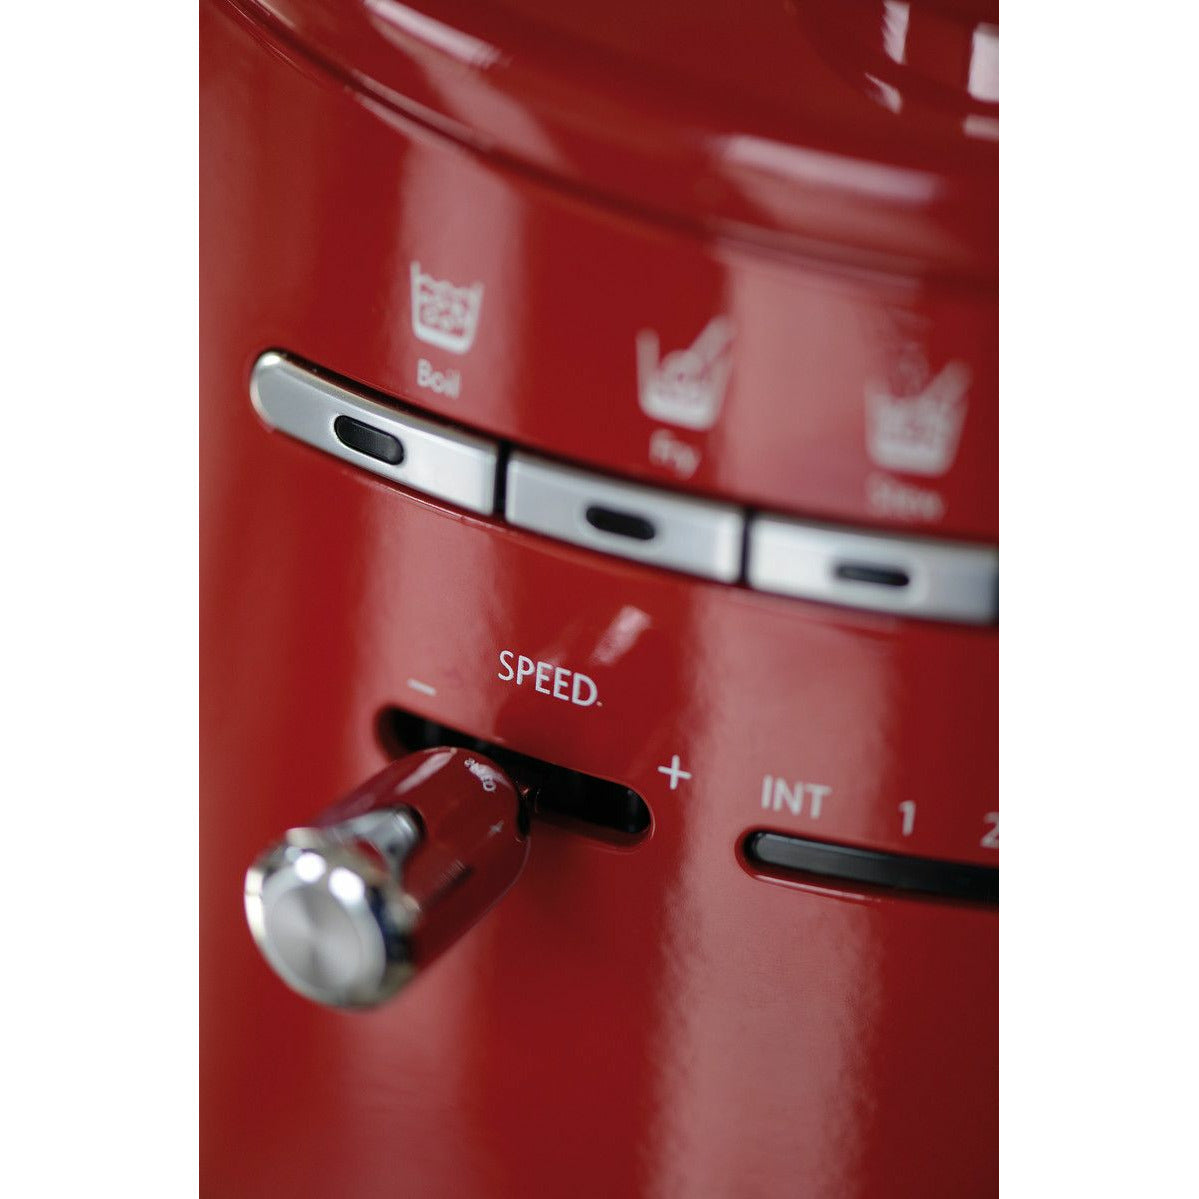 Kitchen Aid 5 Kcf0104 Artisan Cook Processor, Love Apple Red